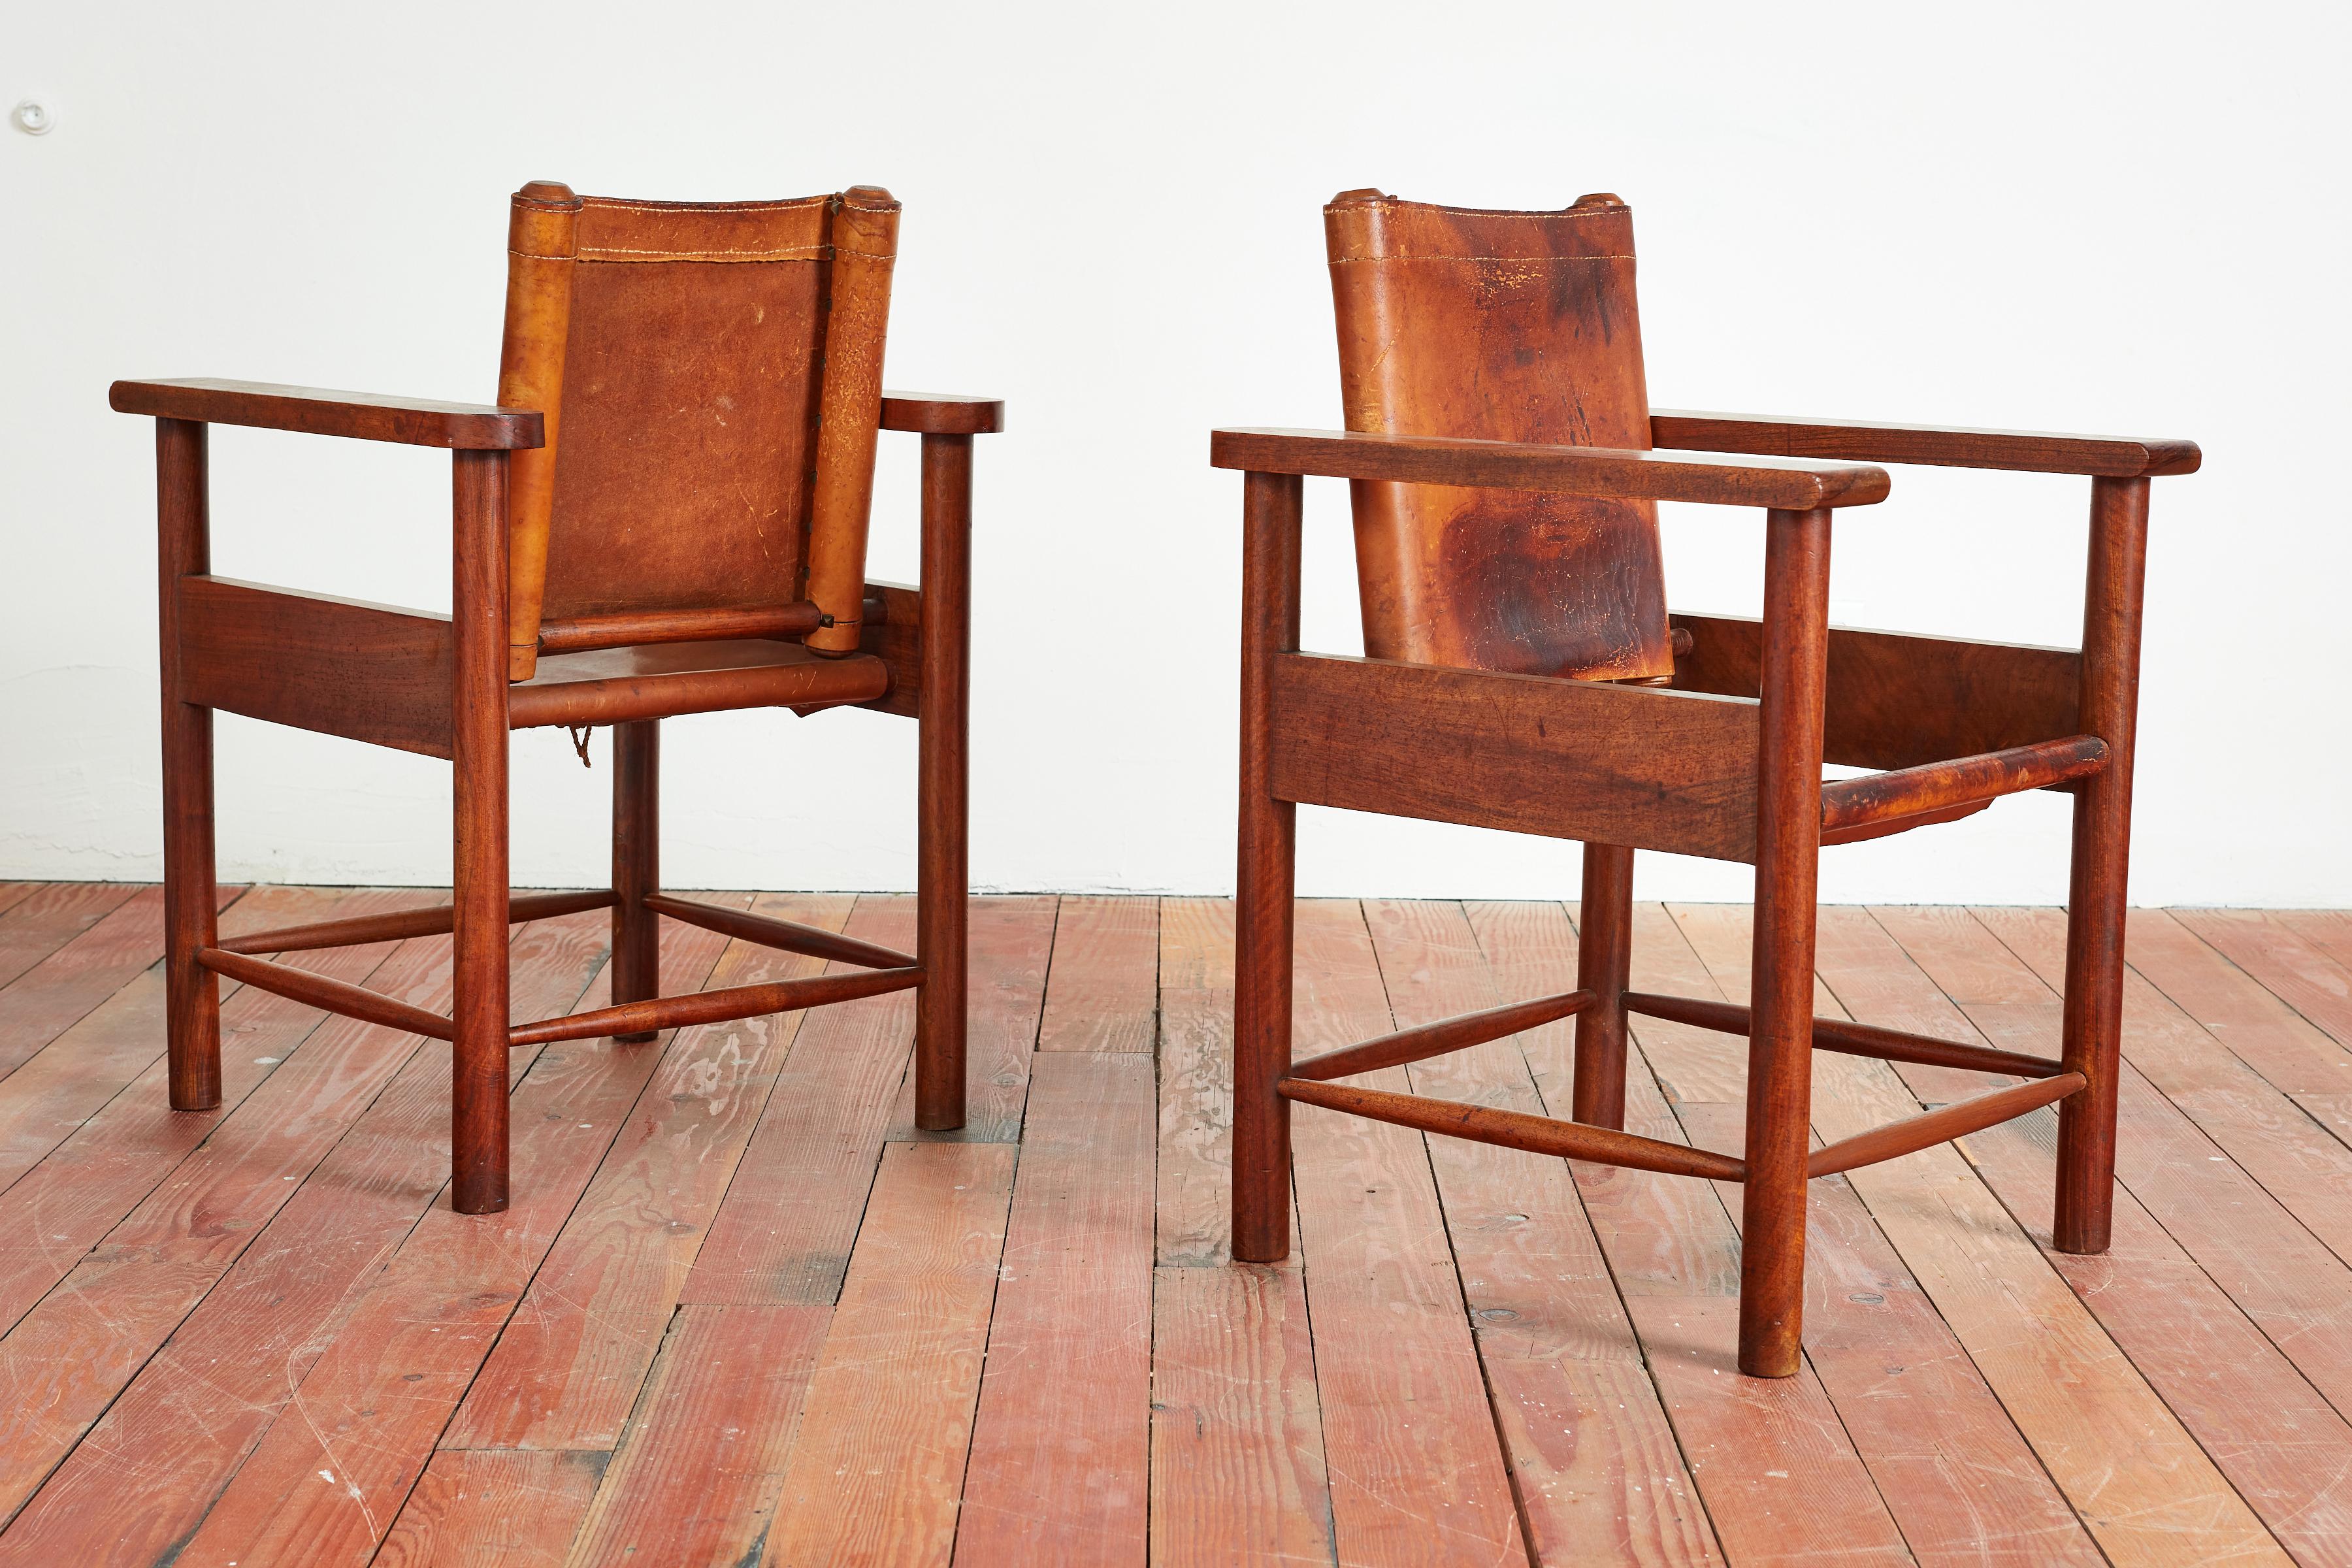 Fantastic pair of 1940s French leather chairs with plank oak armrests. Ornate detailing / construction with wonderful patina to leather and oak.